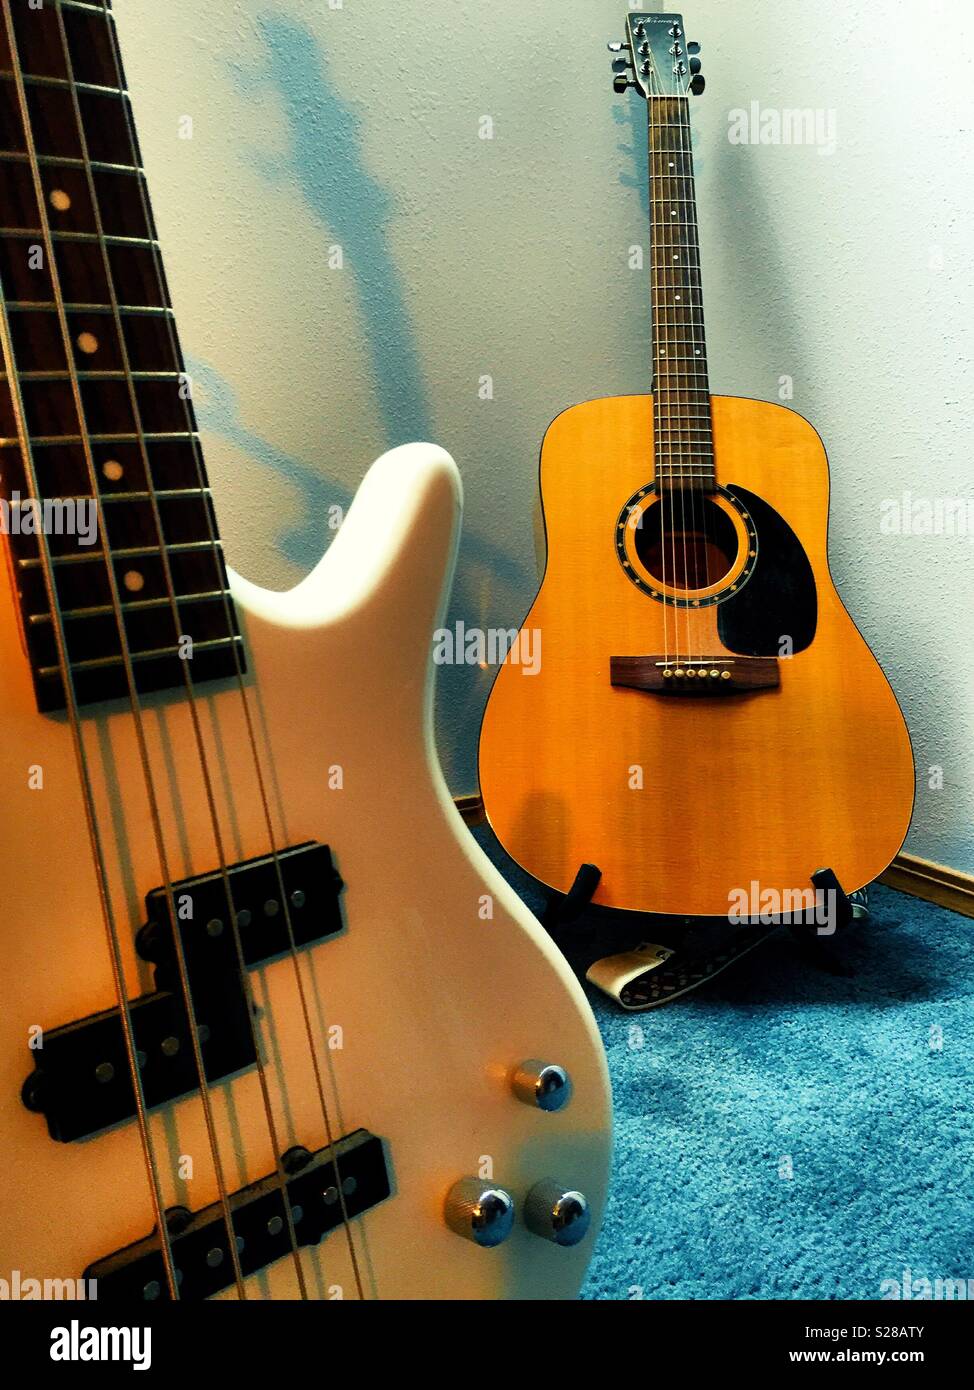 Guitars on stands in a home music room, USA Stock Photo